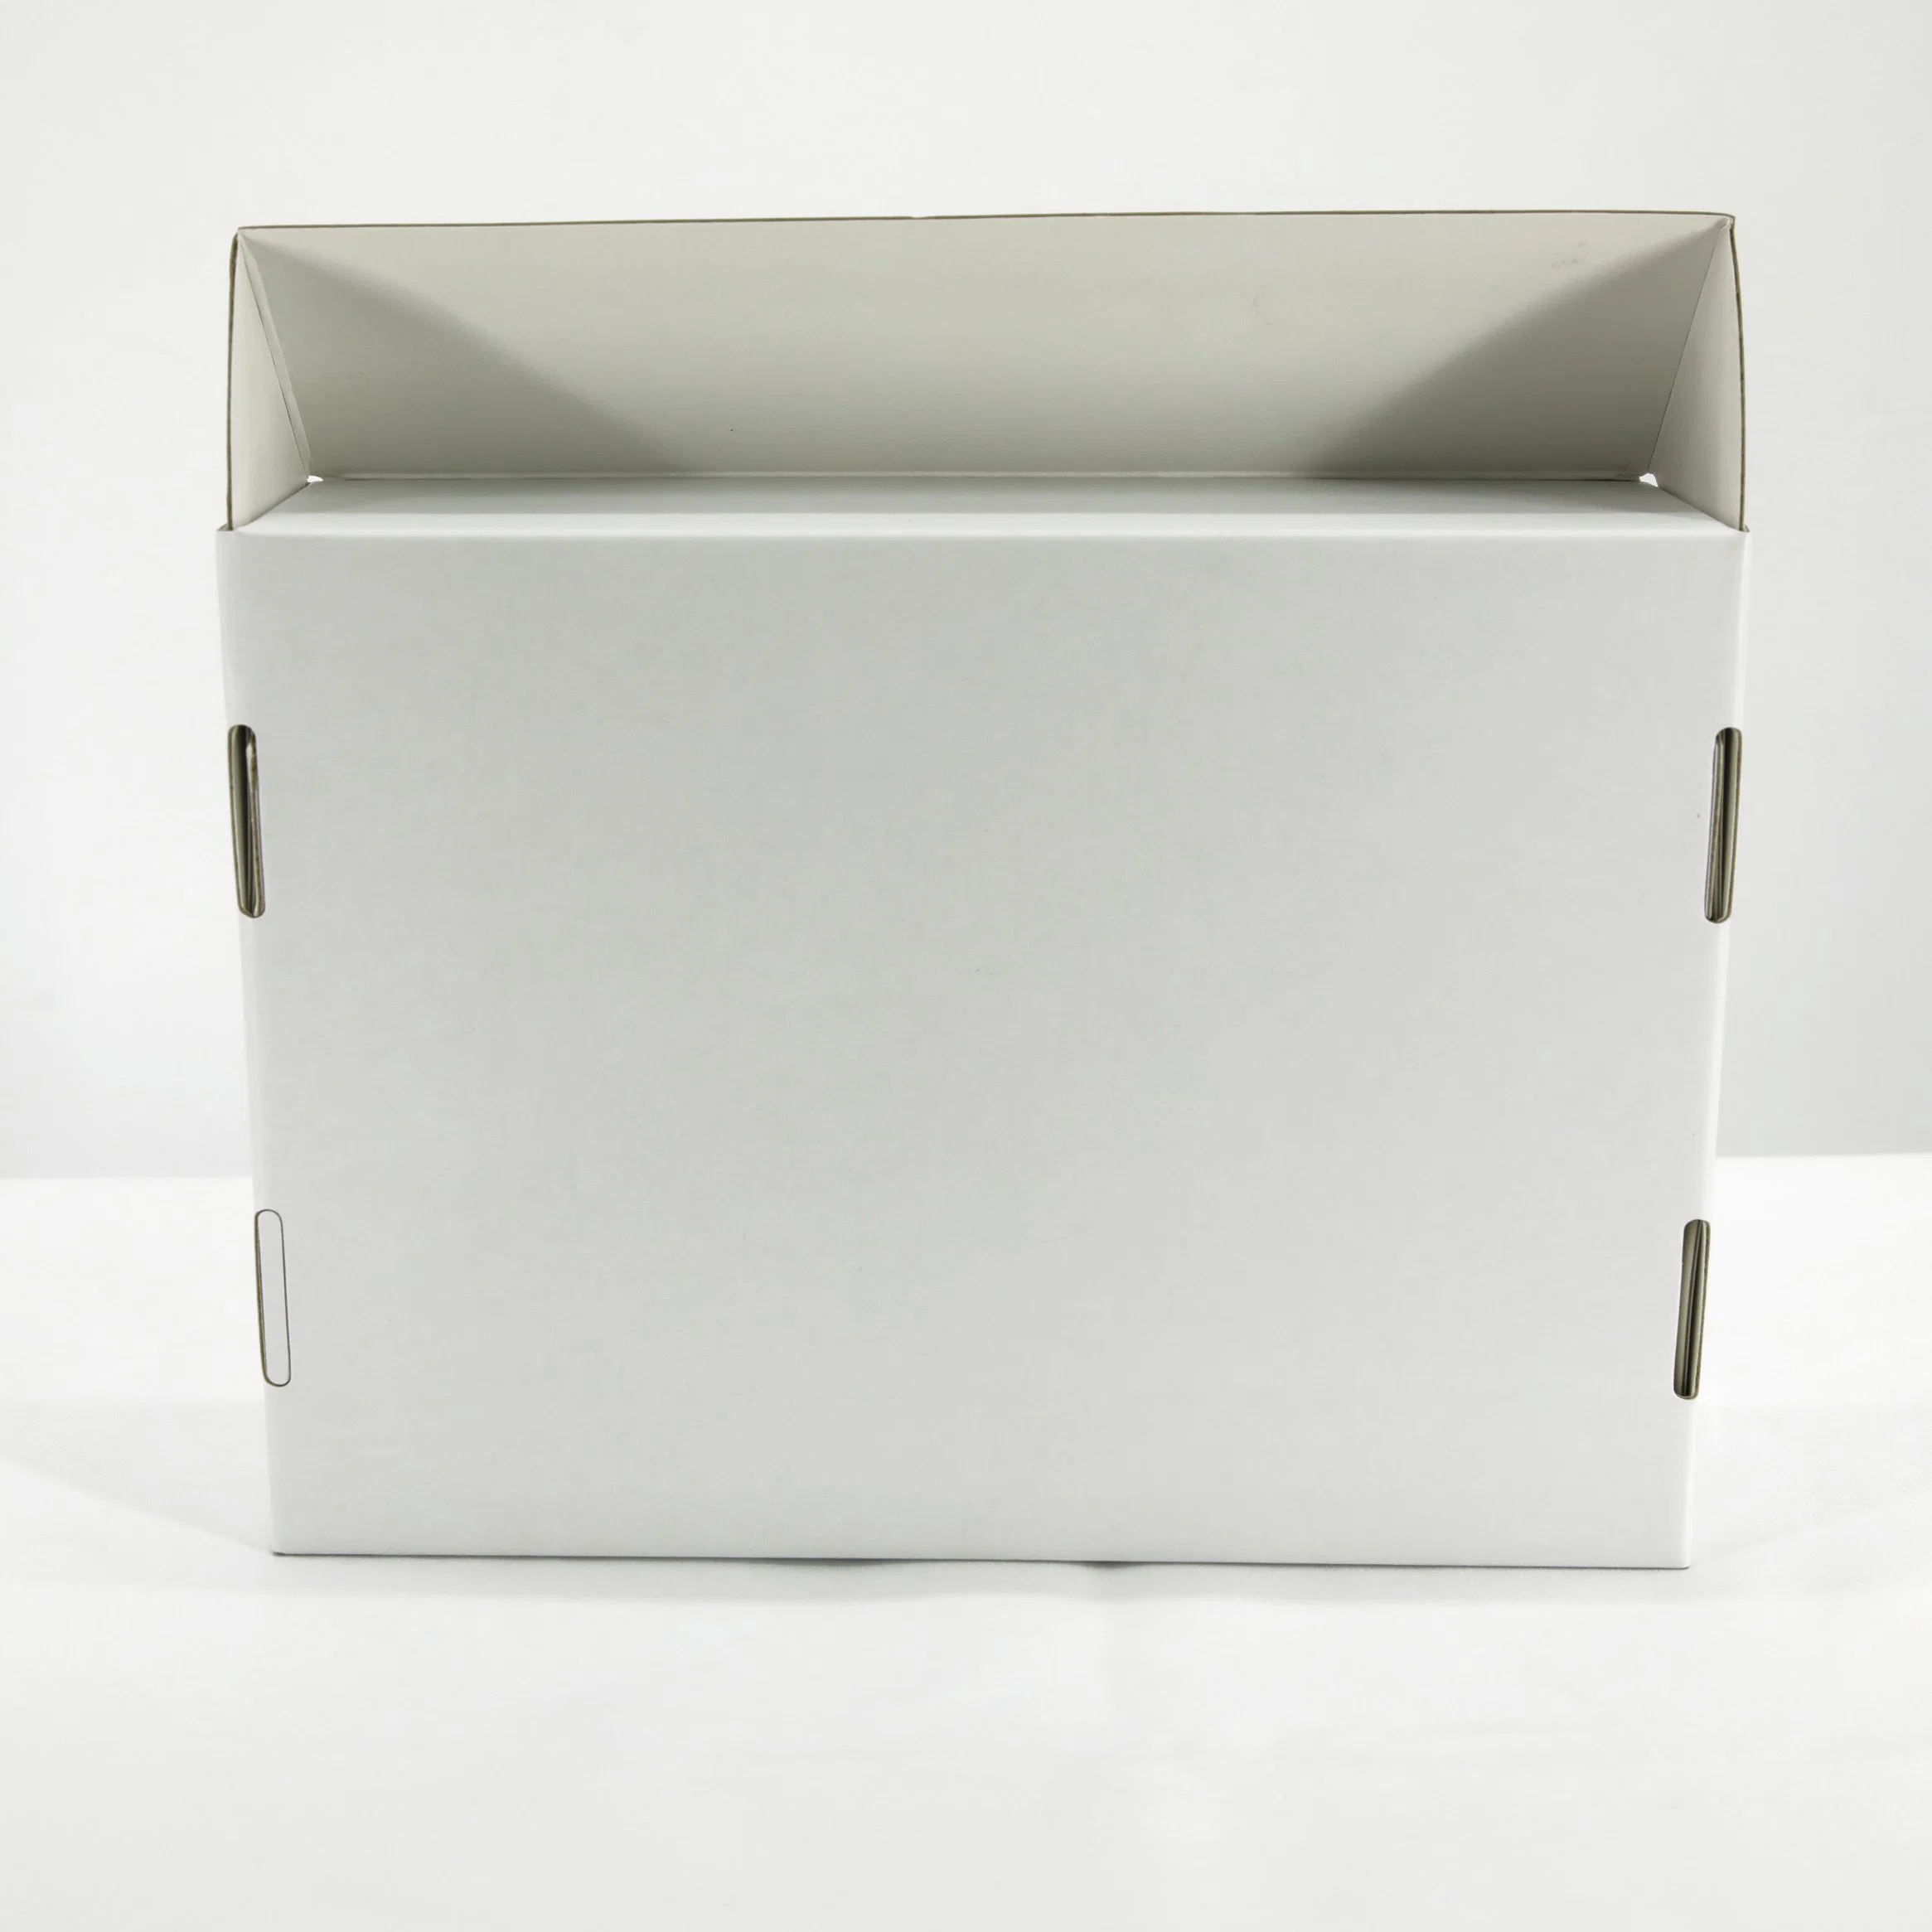 Custom Cardboard Boxes for Business